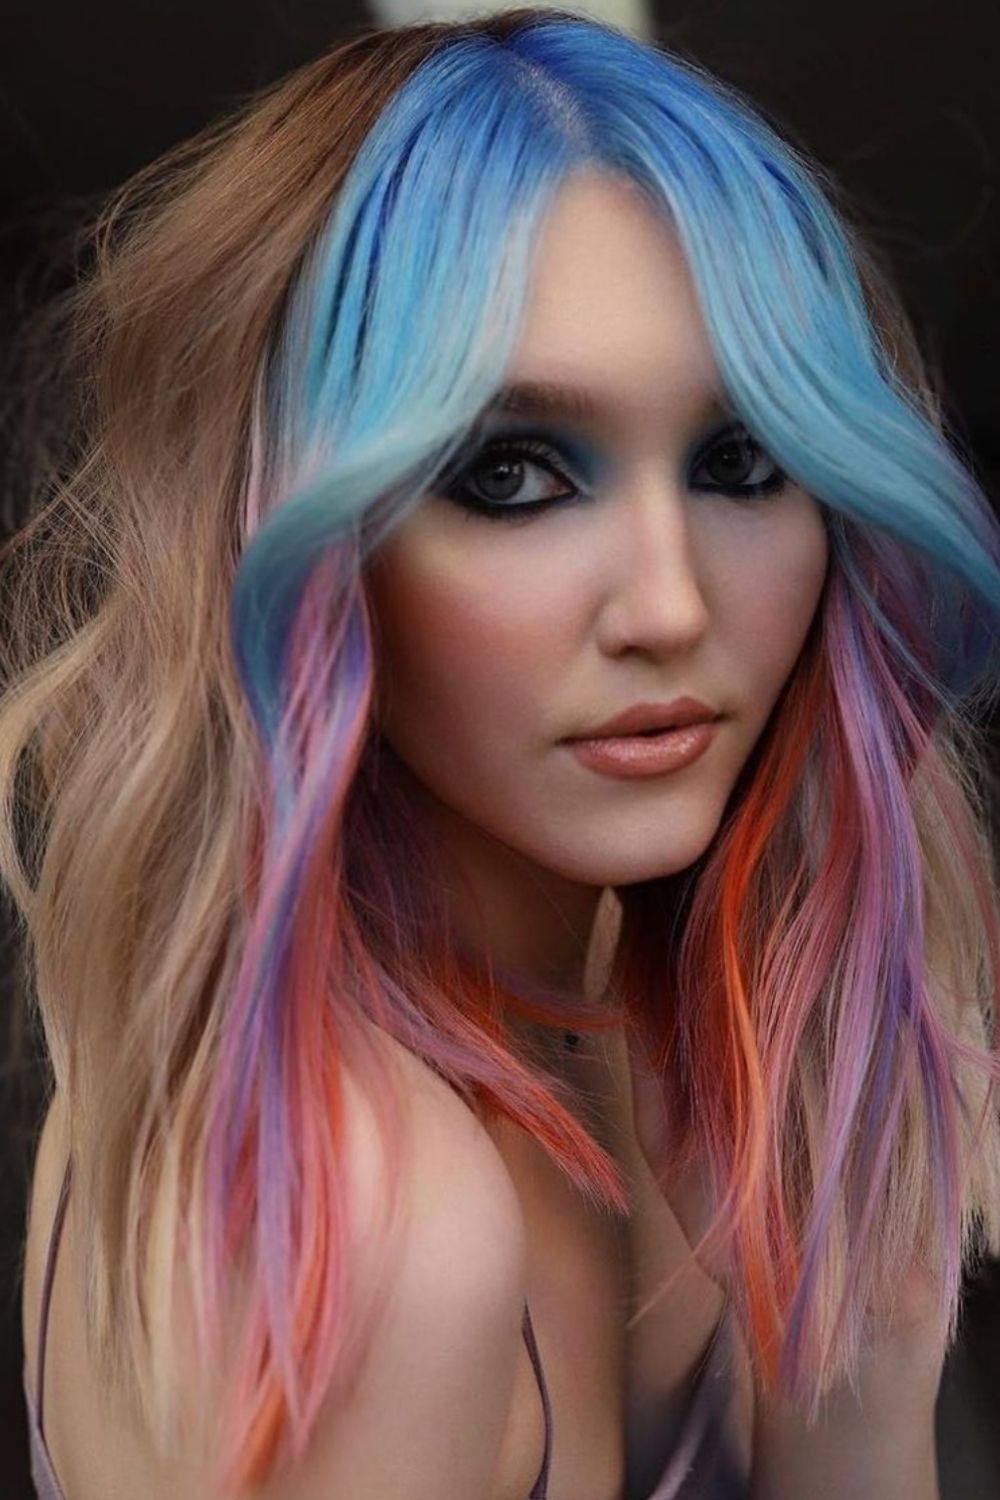 44 Best Fall hair colors and hair dye ideas for 2021! Page 4 of 7